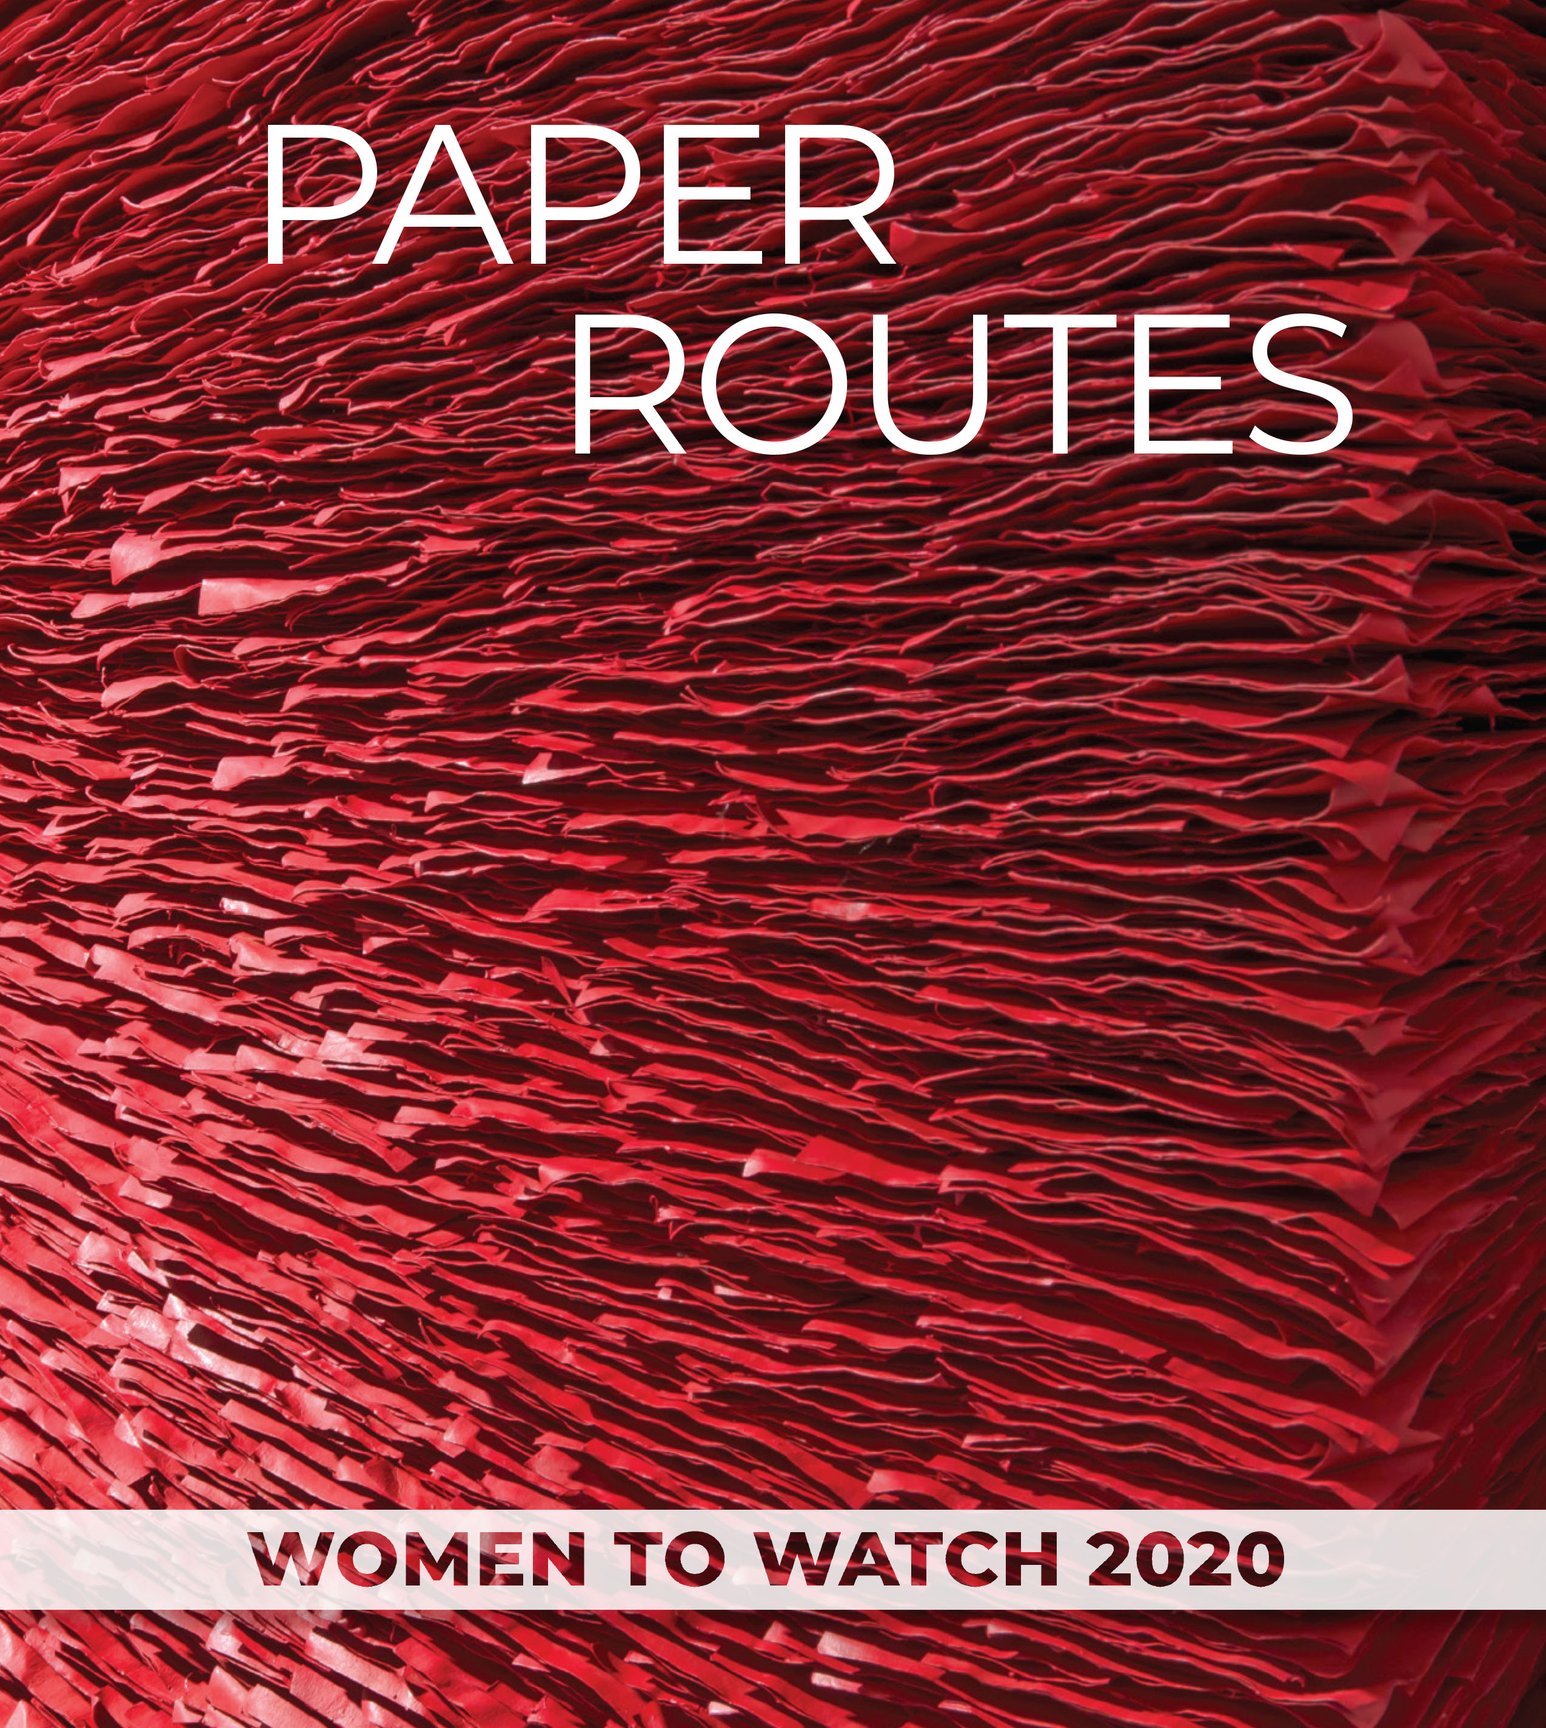 Book cover features bright red stacks of crinkled paper radiating from the left side. The books title 'Paper Routes Women to Watch 2020' is in white text.